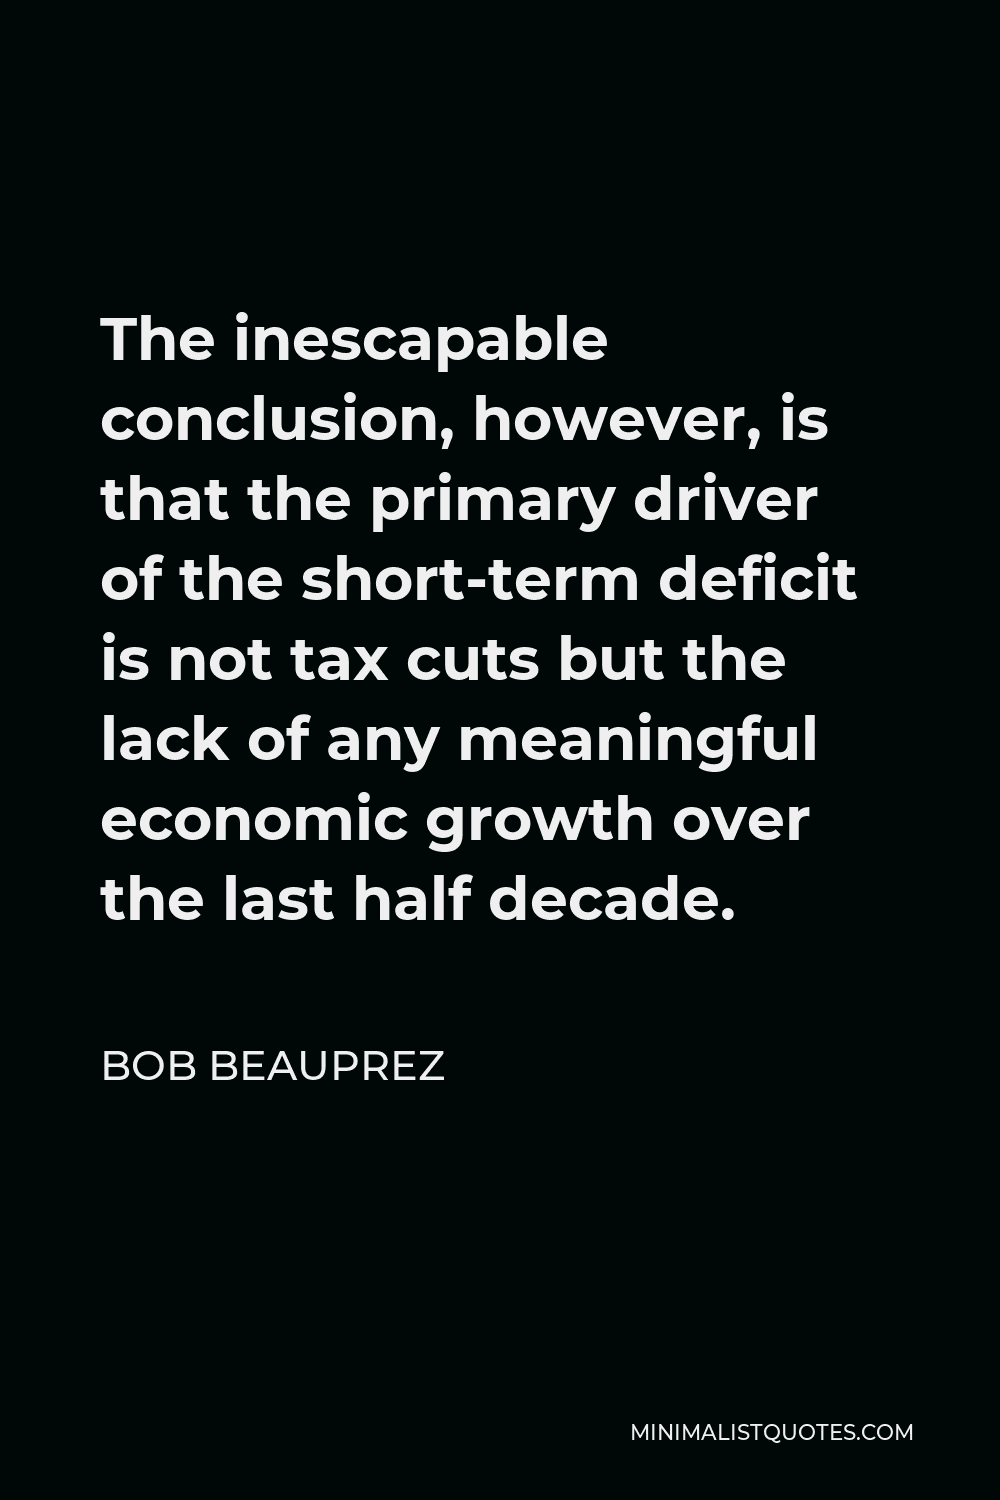 Bob Beauprez Quote - The inescapable conclusion, however, is that the primary driver of the short-term deficit is not tax cuts but the lack of any meaningful economic growth over the last half decade.